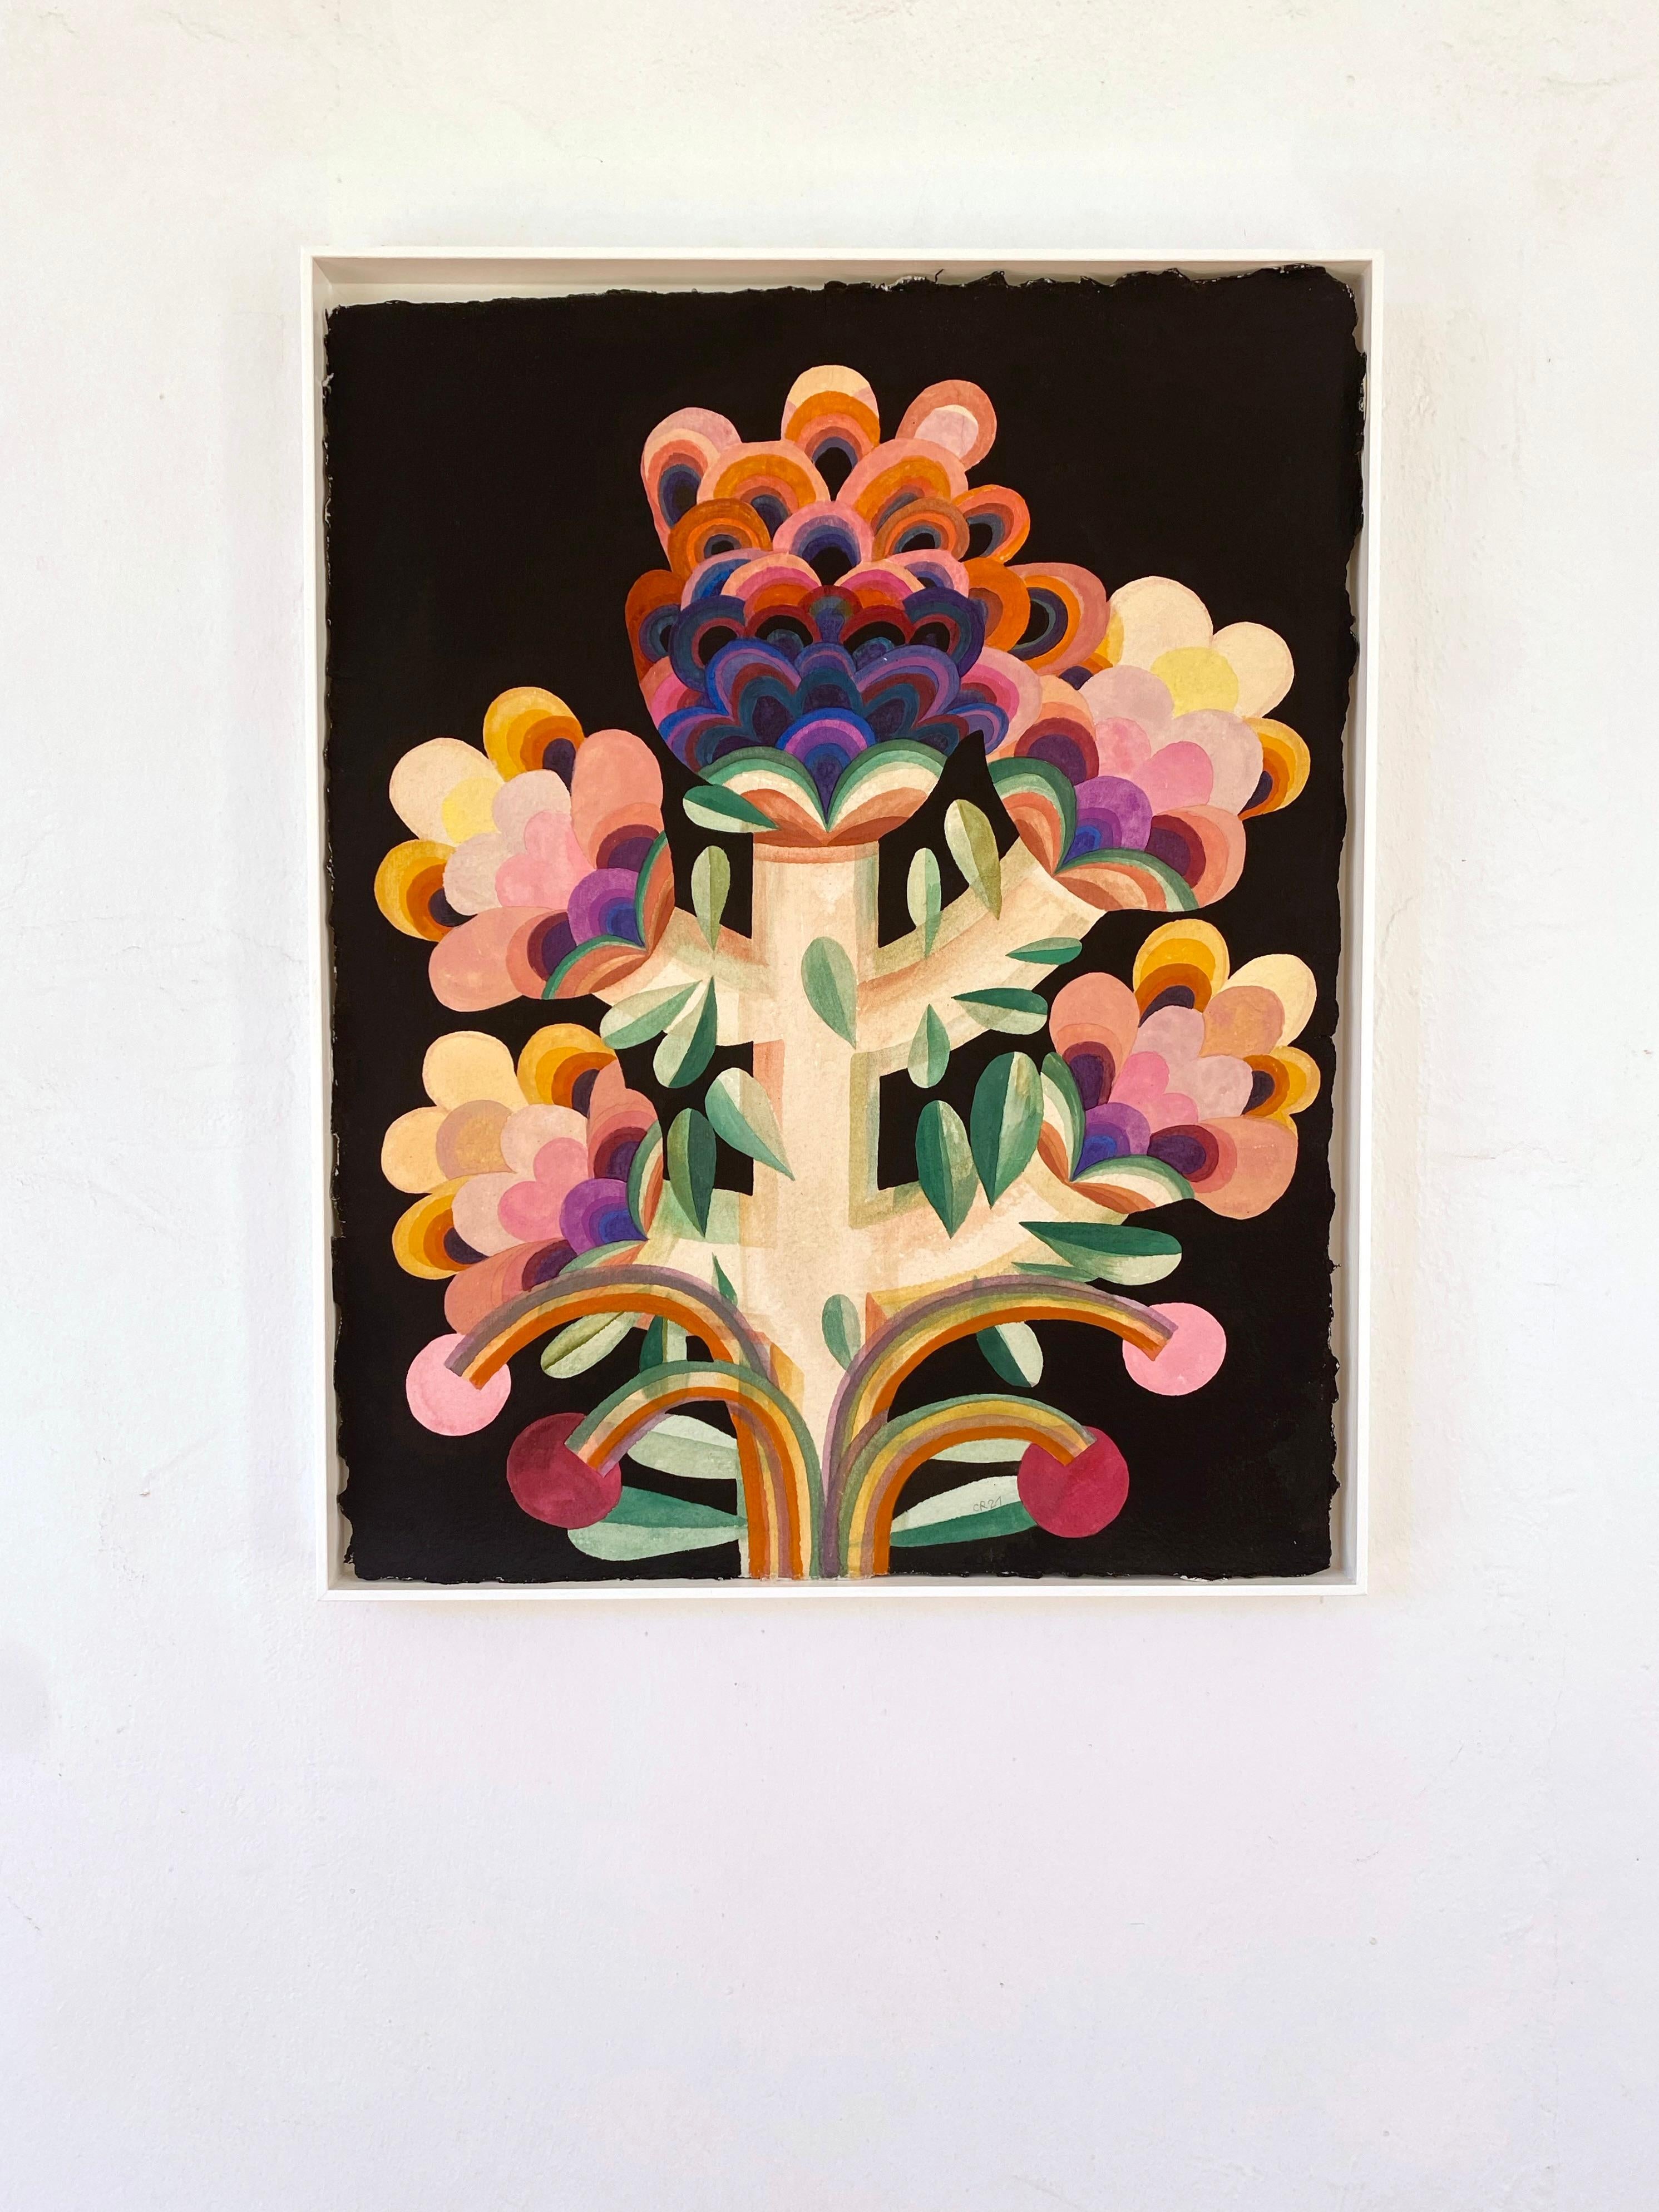 In 2020, Caroline Rennequin painted 350 flowers. Including a series of 301 gouaches on handmade Indian paper, in a work that narrates the aesthetics of the feminine and its relationship with nature, which she endlessly colors with a living